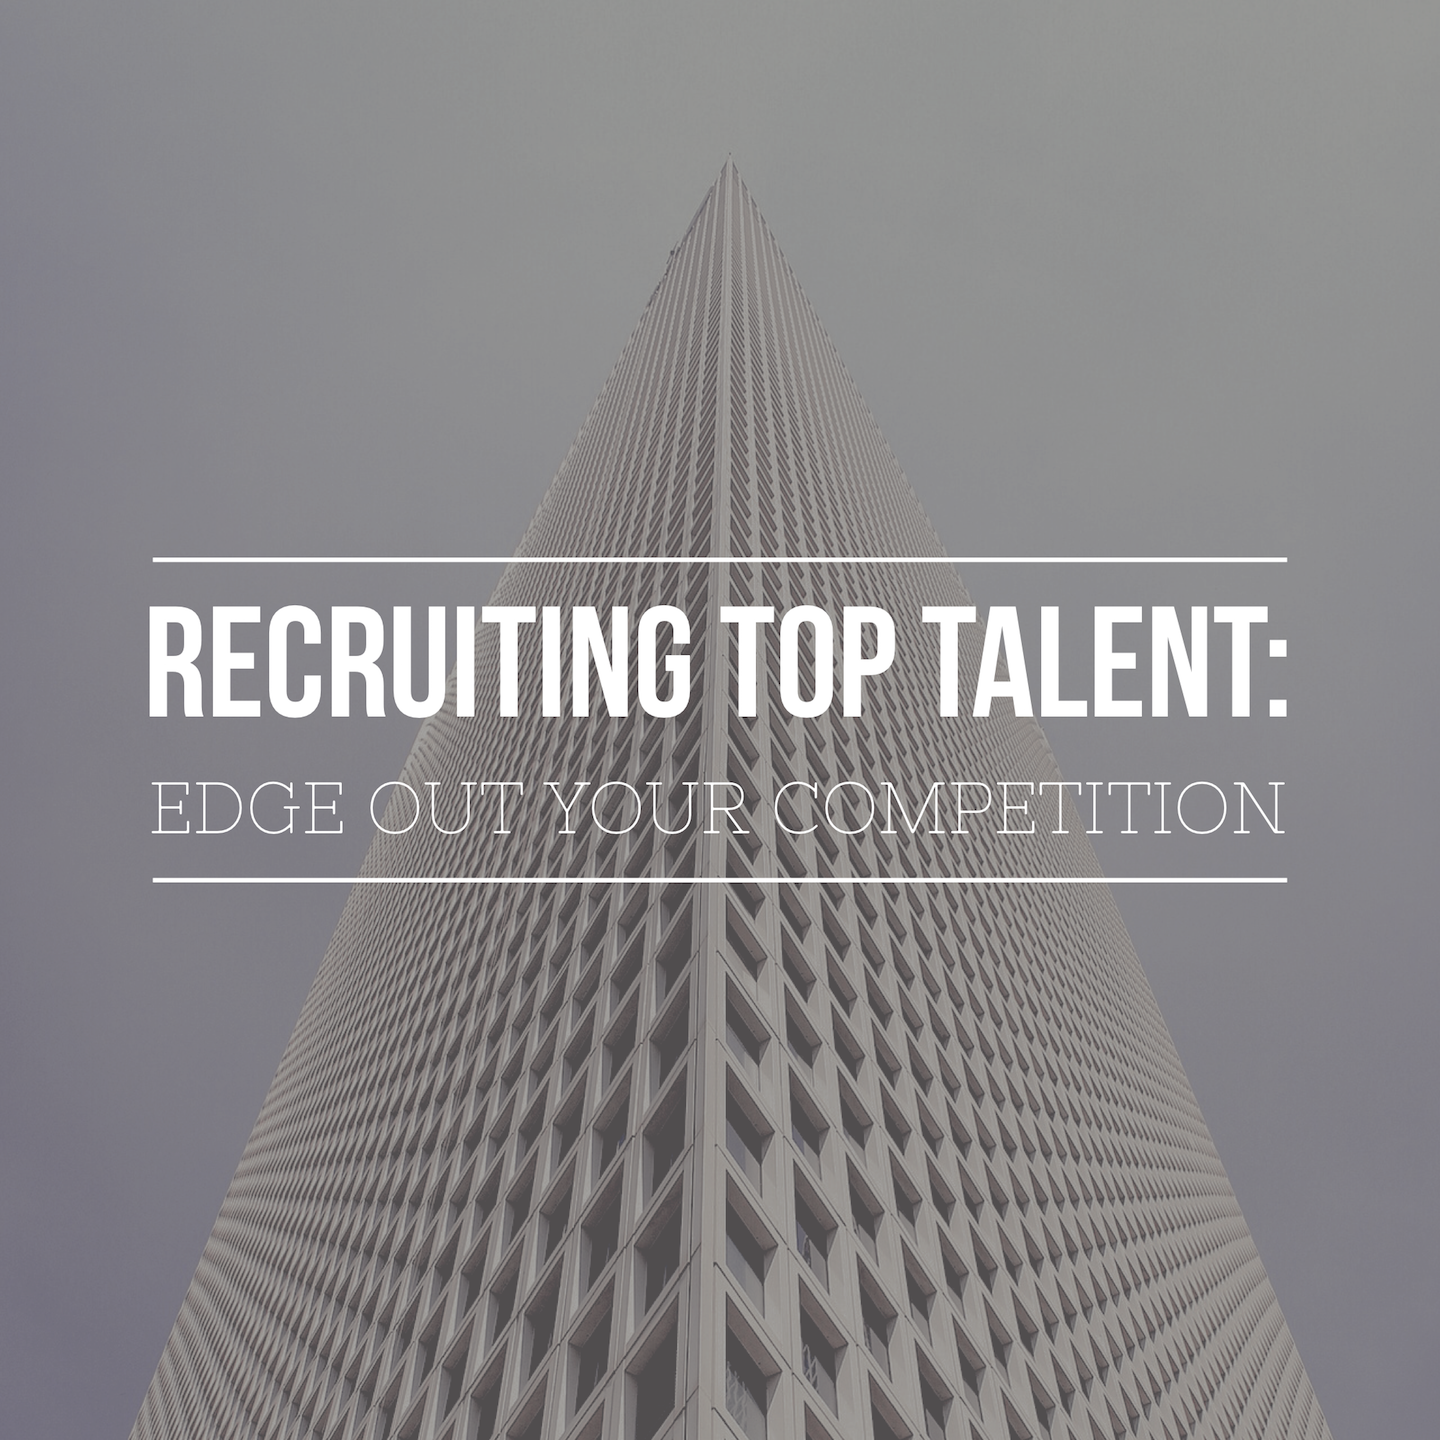 Recruiting Top Talent: Edge Out Your Competition